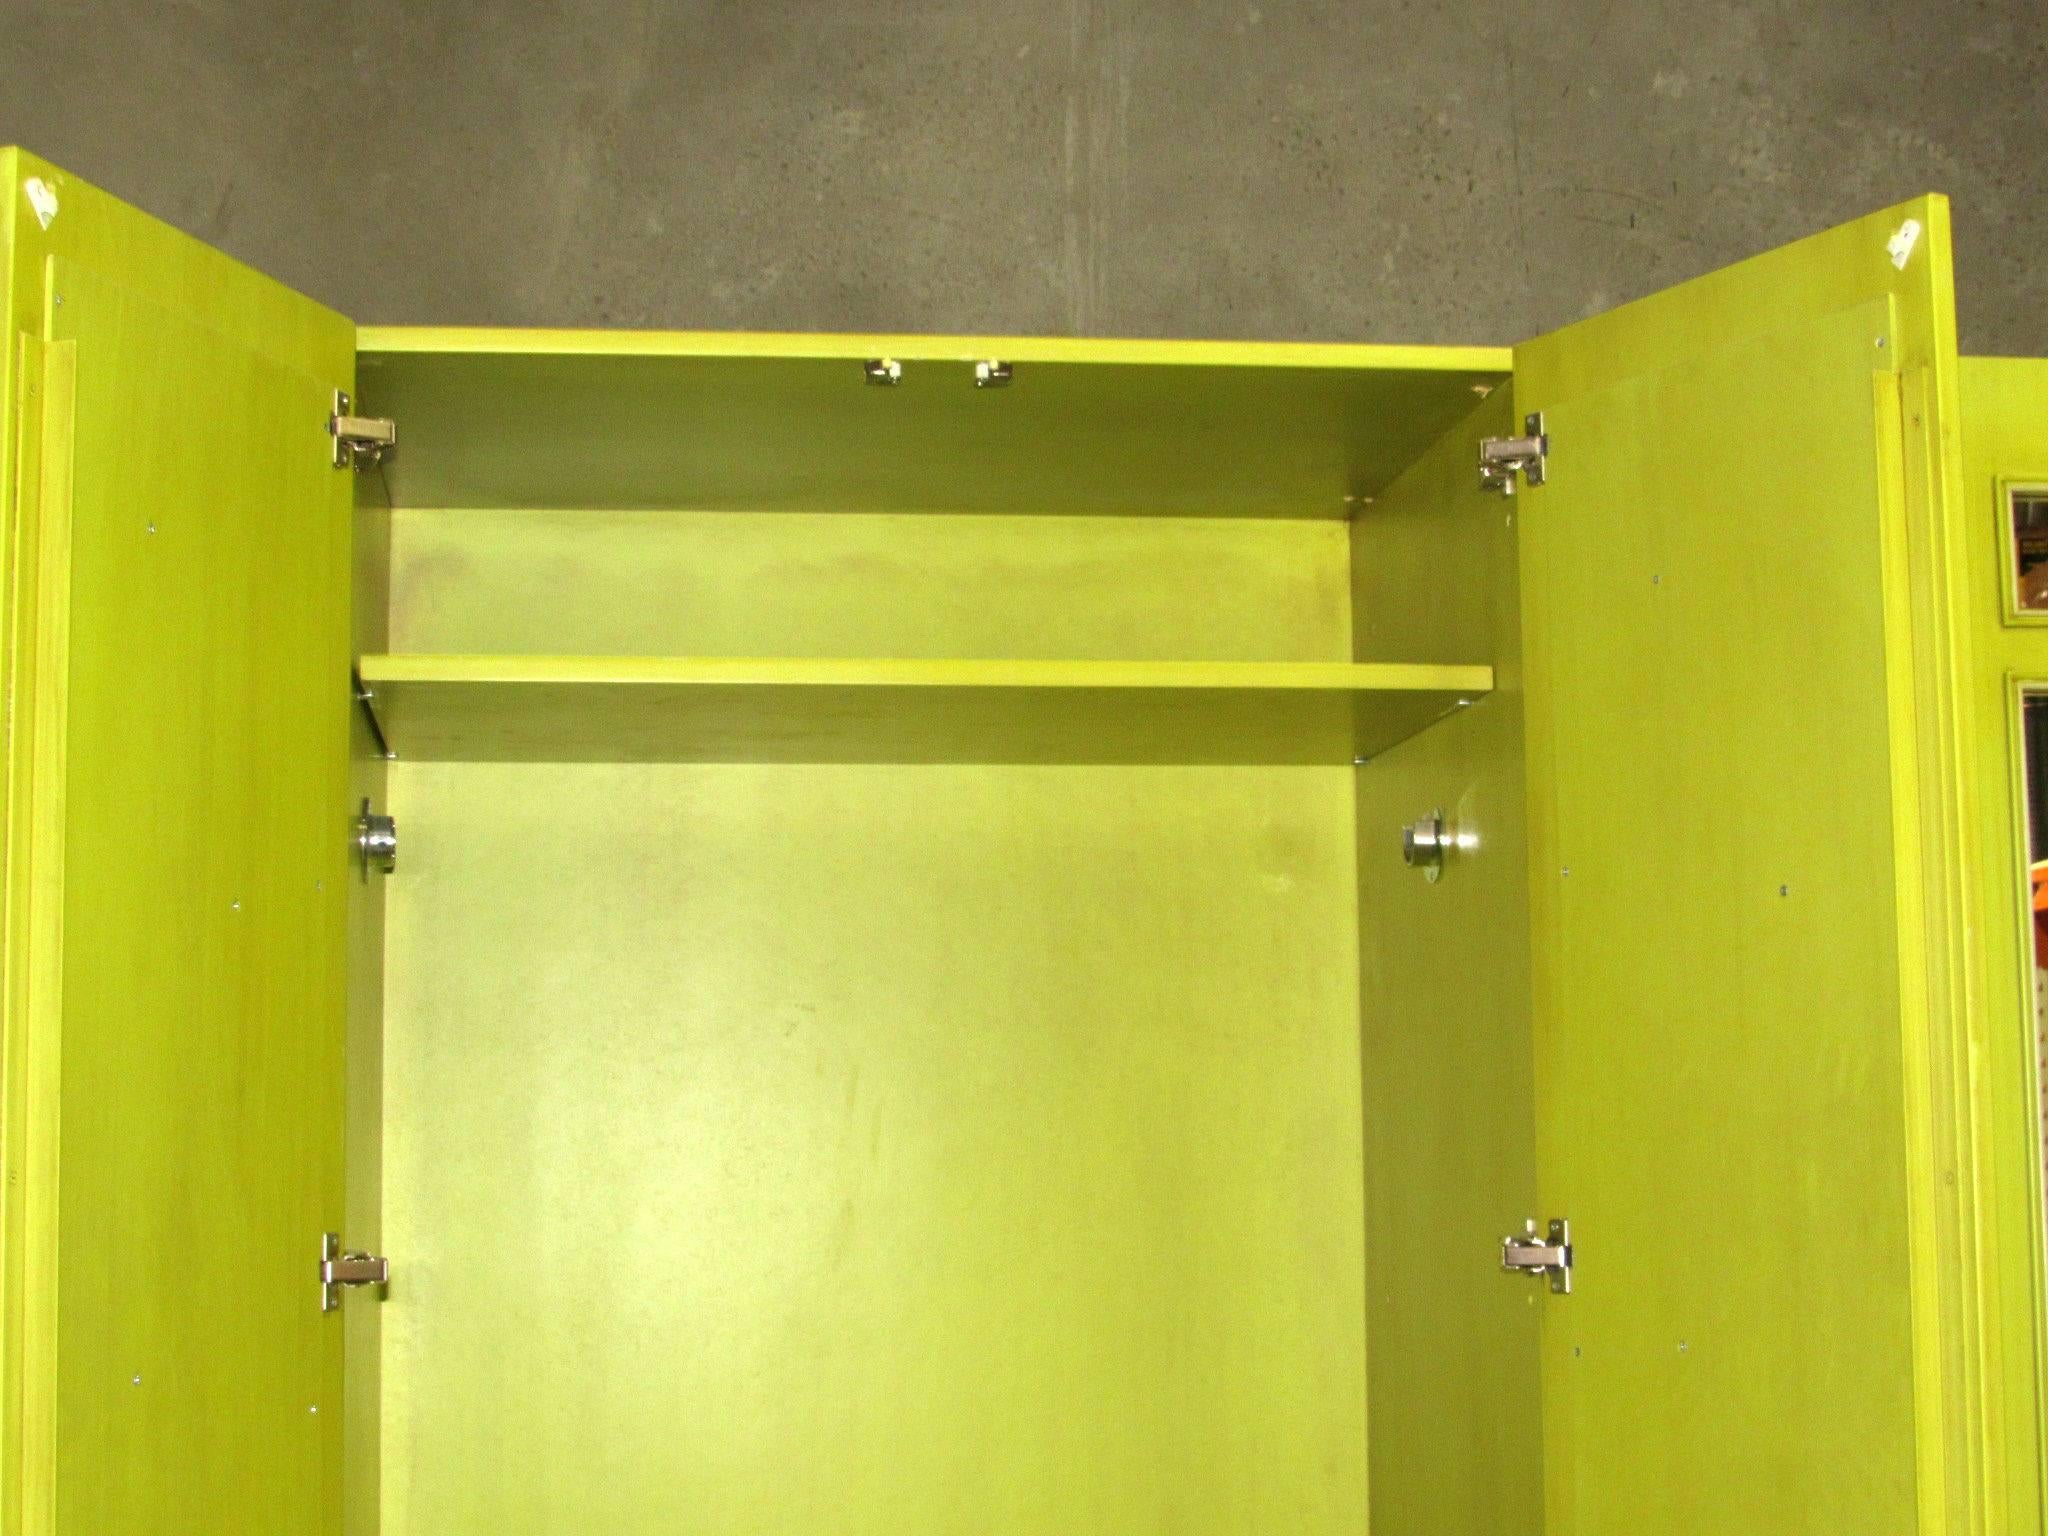 Mid-Century Modern Pair of Mirrored Wardrobe Armoires in Mod Pop Lime Green Lacquer, circa 1970s